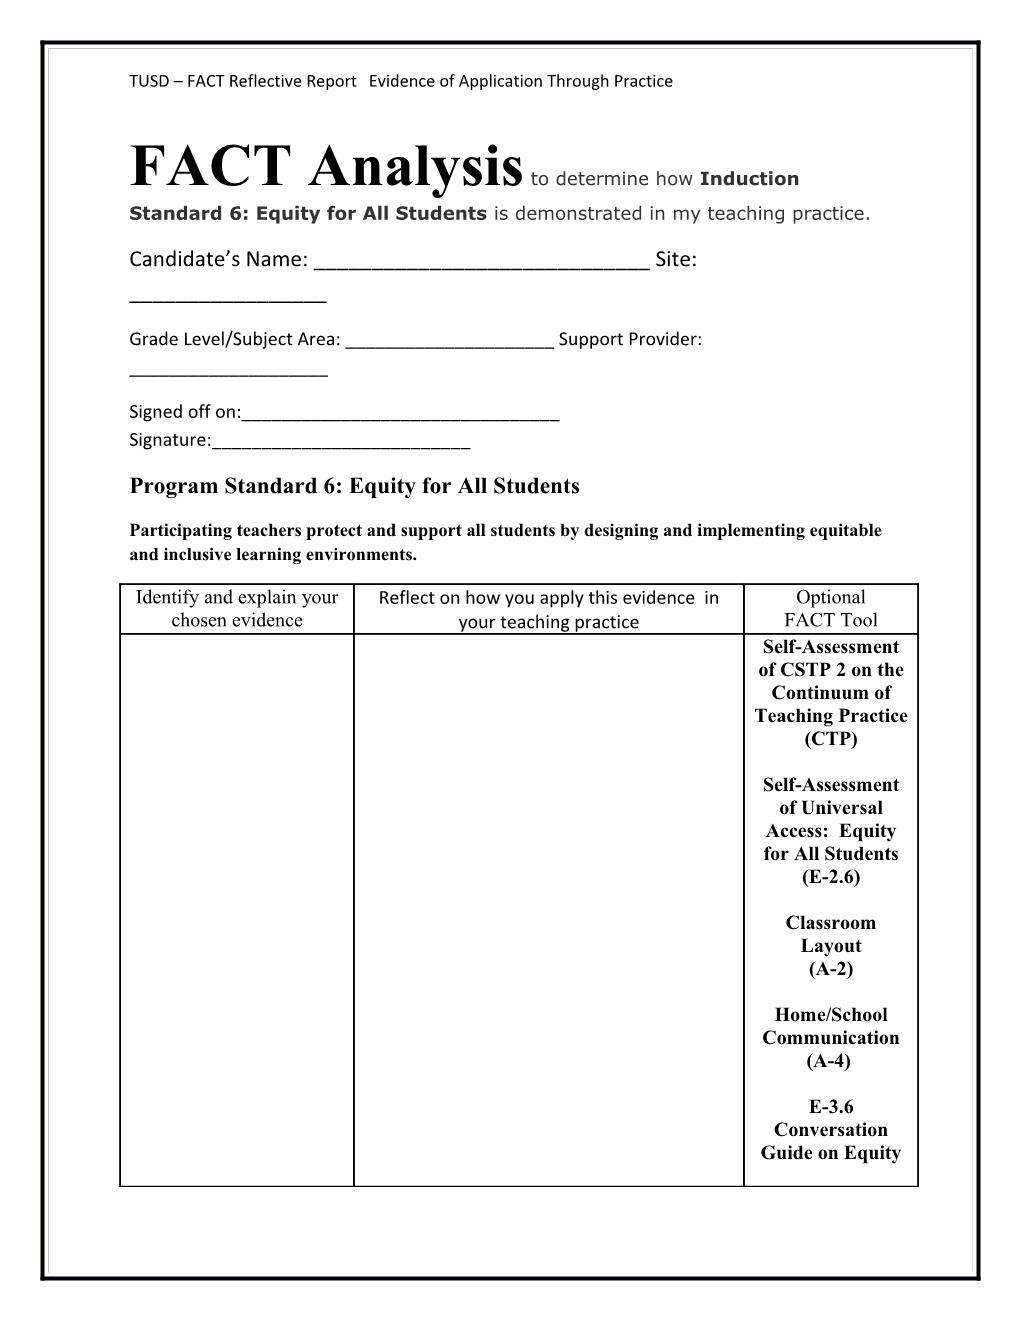 FACT Analysis to Determine How Induction Standard 6: Equity for All Students Is Demonstrated